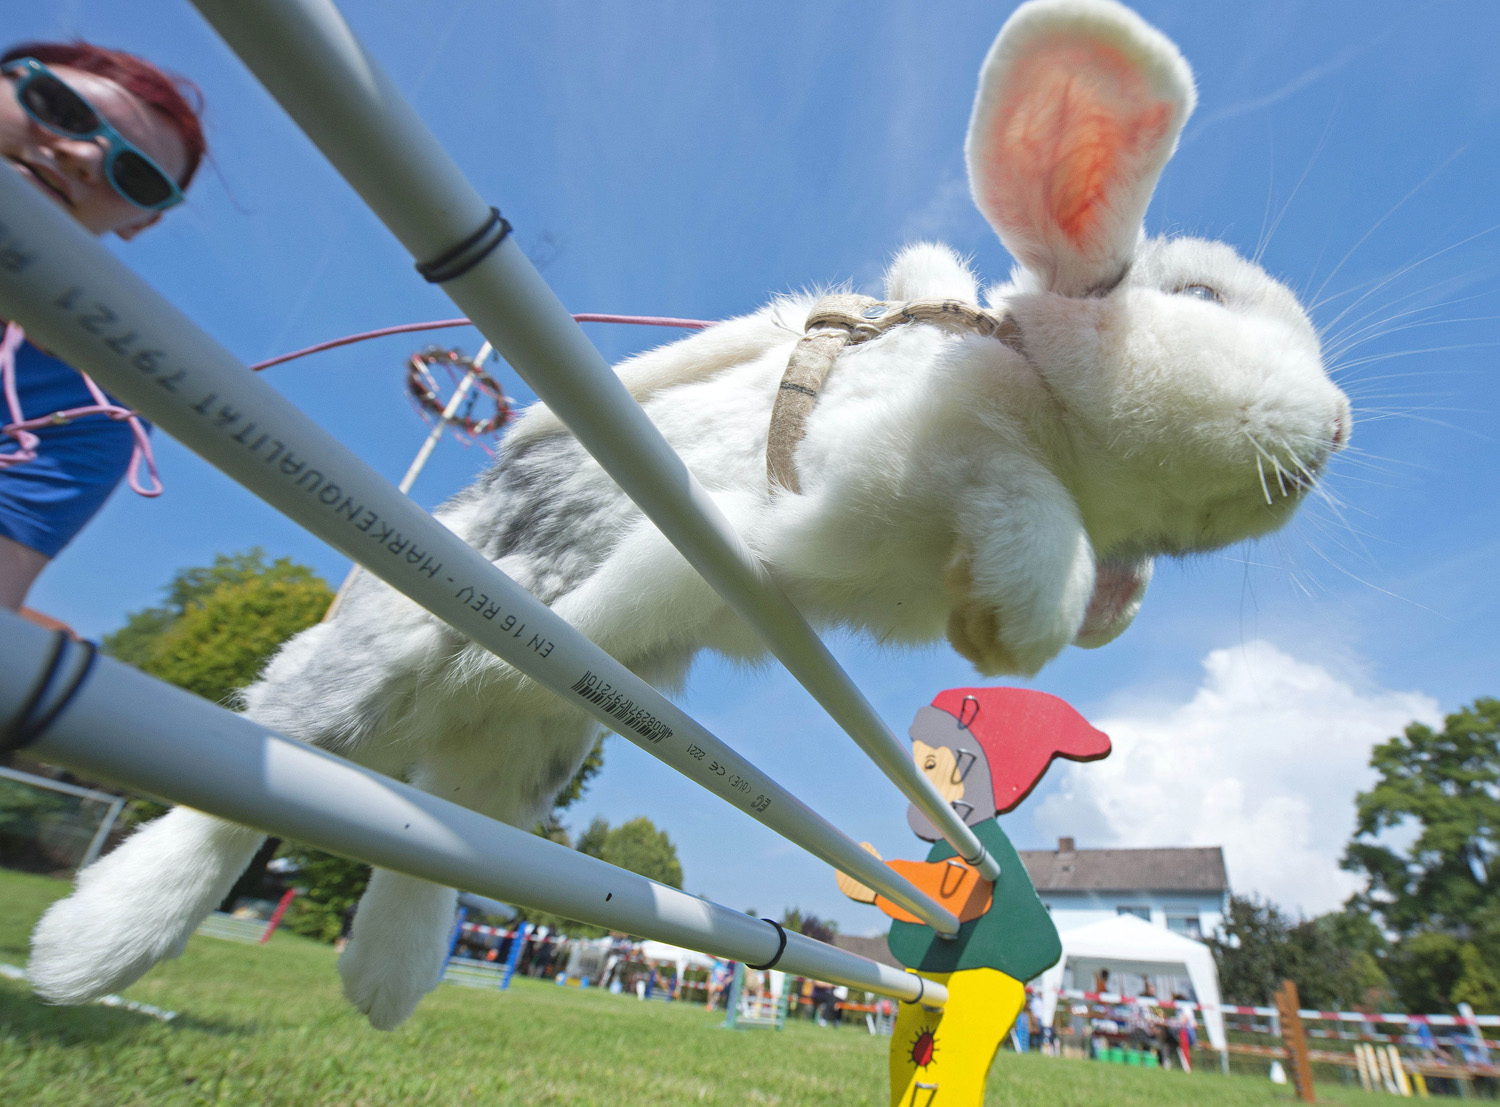 Luisa Riedel's rabbit called Lenny jumps during the Kaninhop (rabbit-jumping) competition in Weissenbrunn vorm Wald, Germany on Sept. 7, 2014.